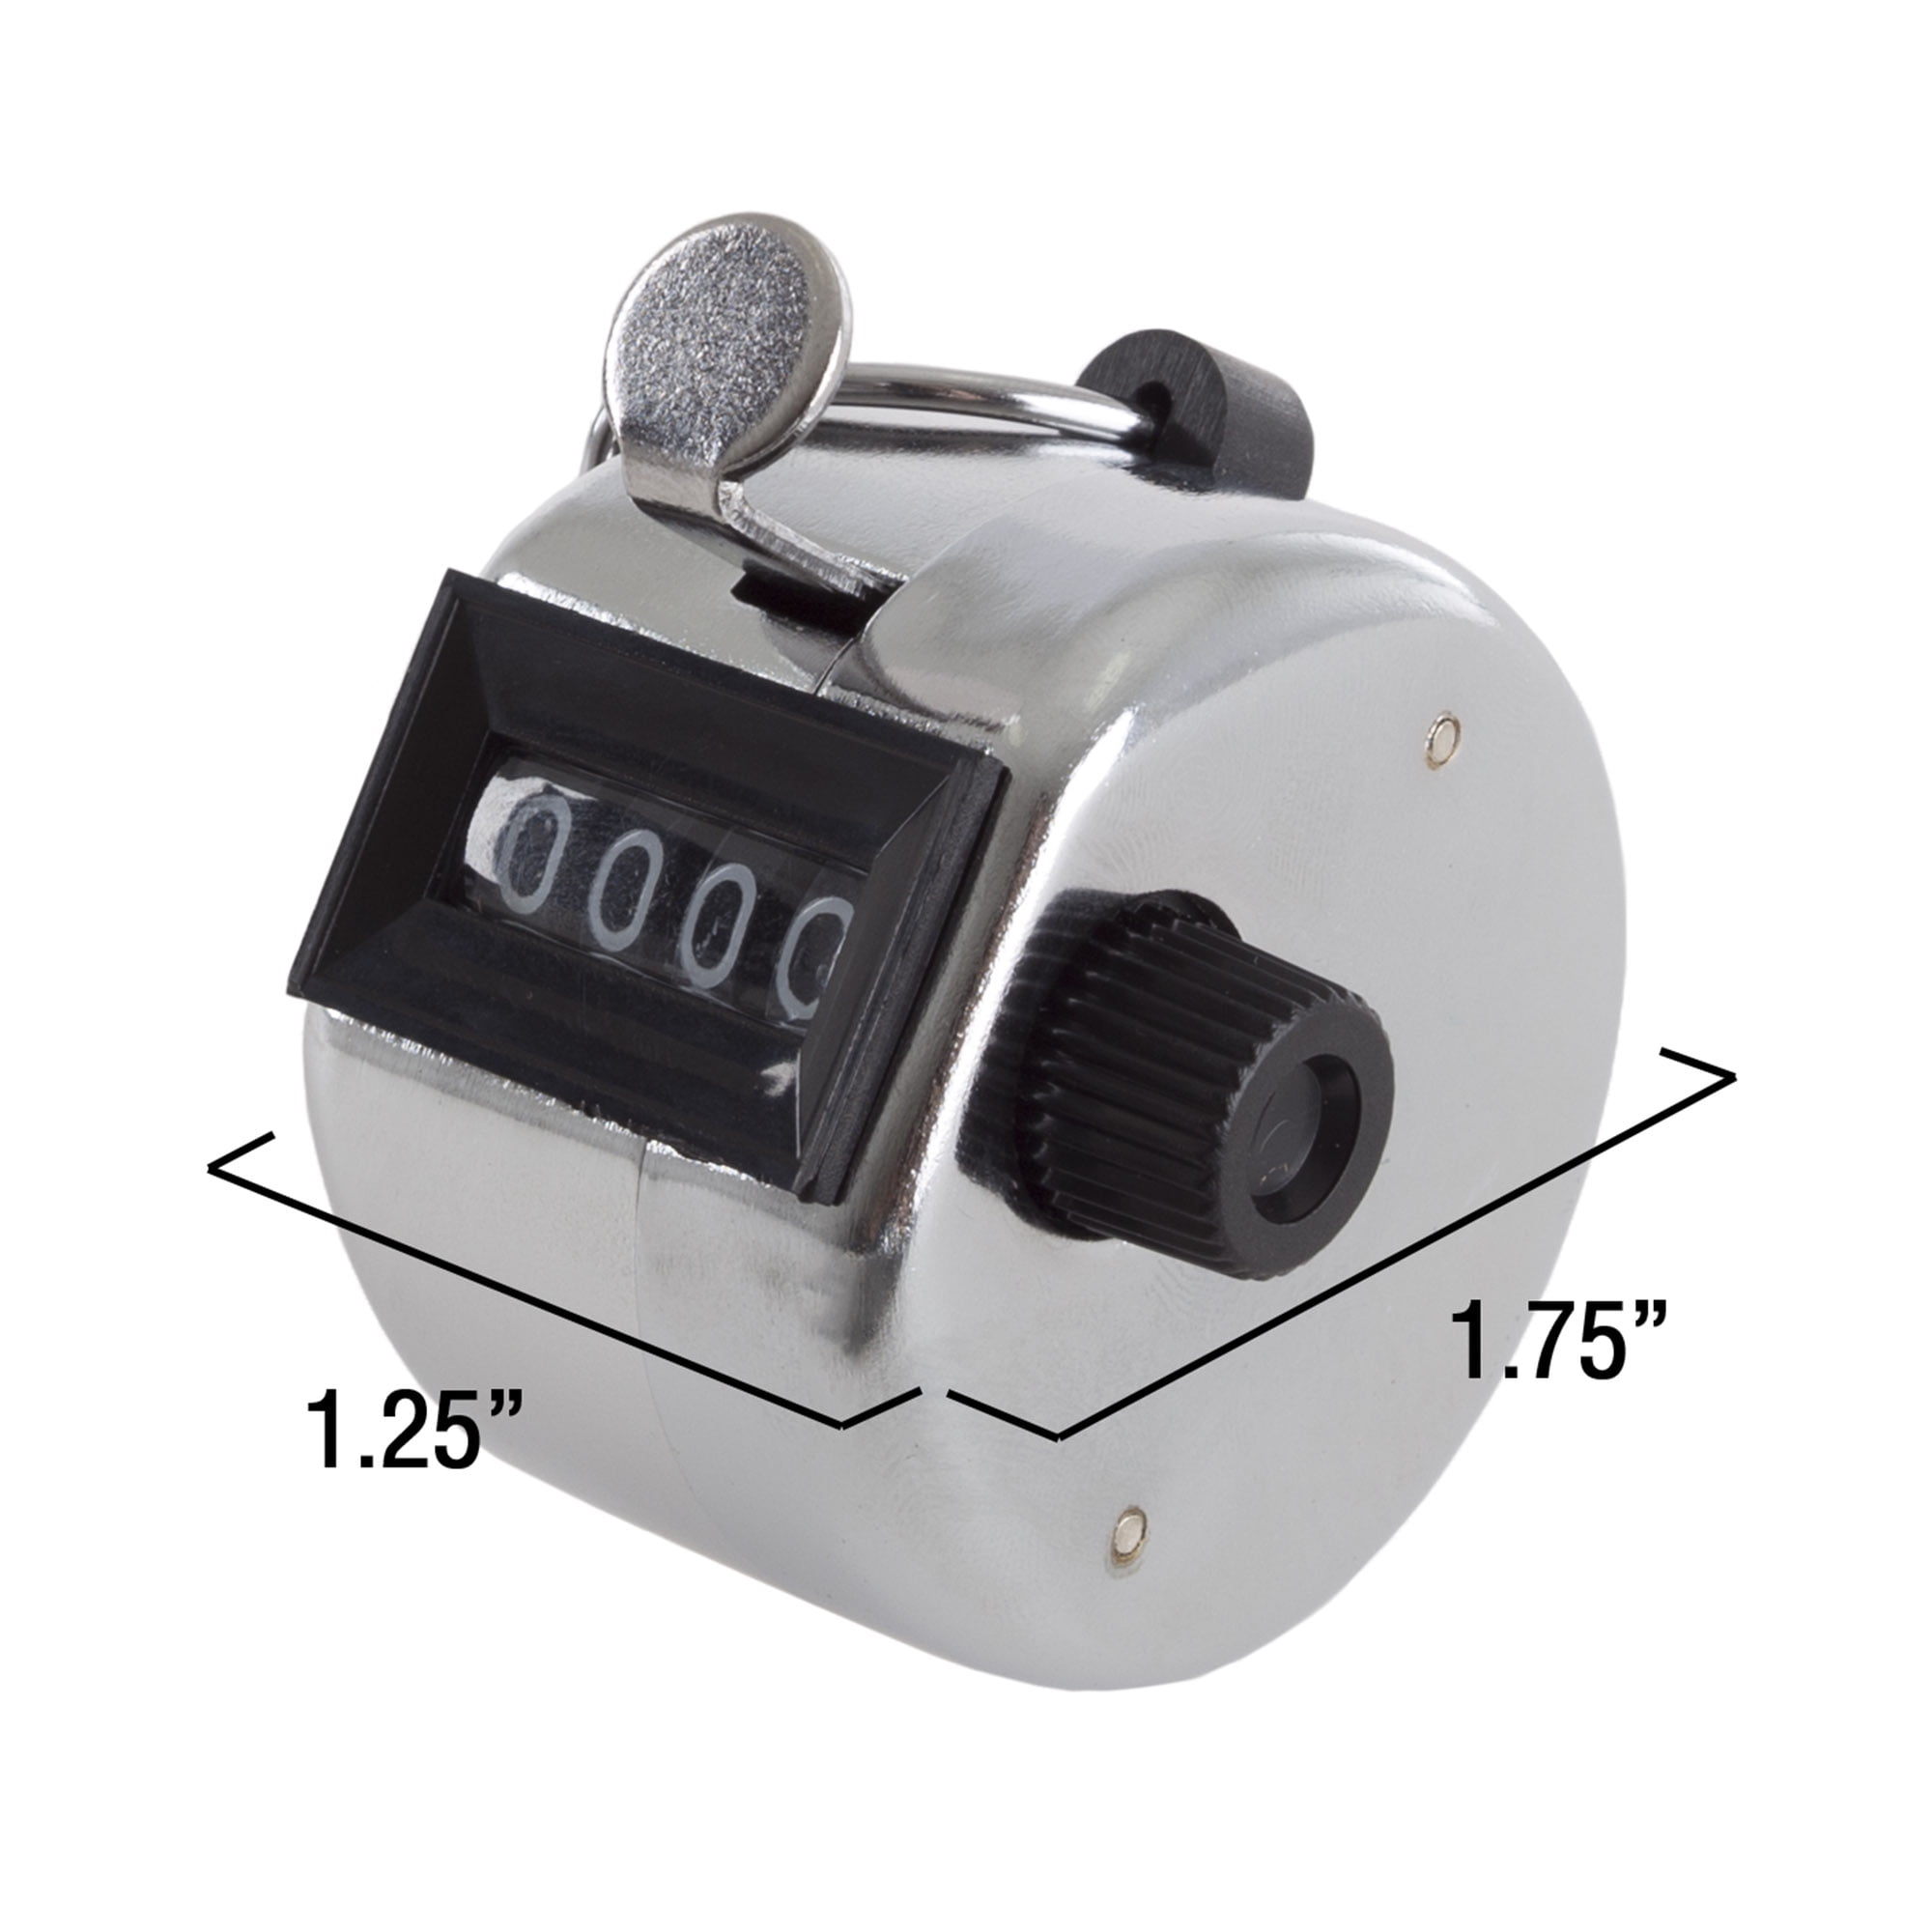 Stalwart 75-COUNTER Hawk Tally Counter Clicker, Handheld or Base Mount 